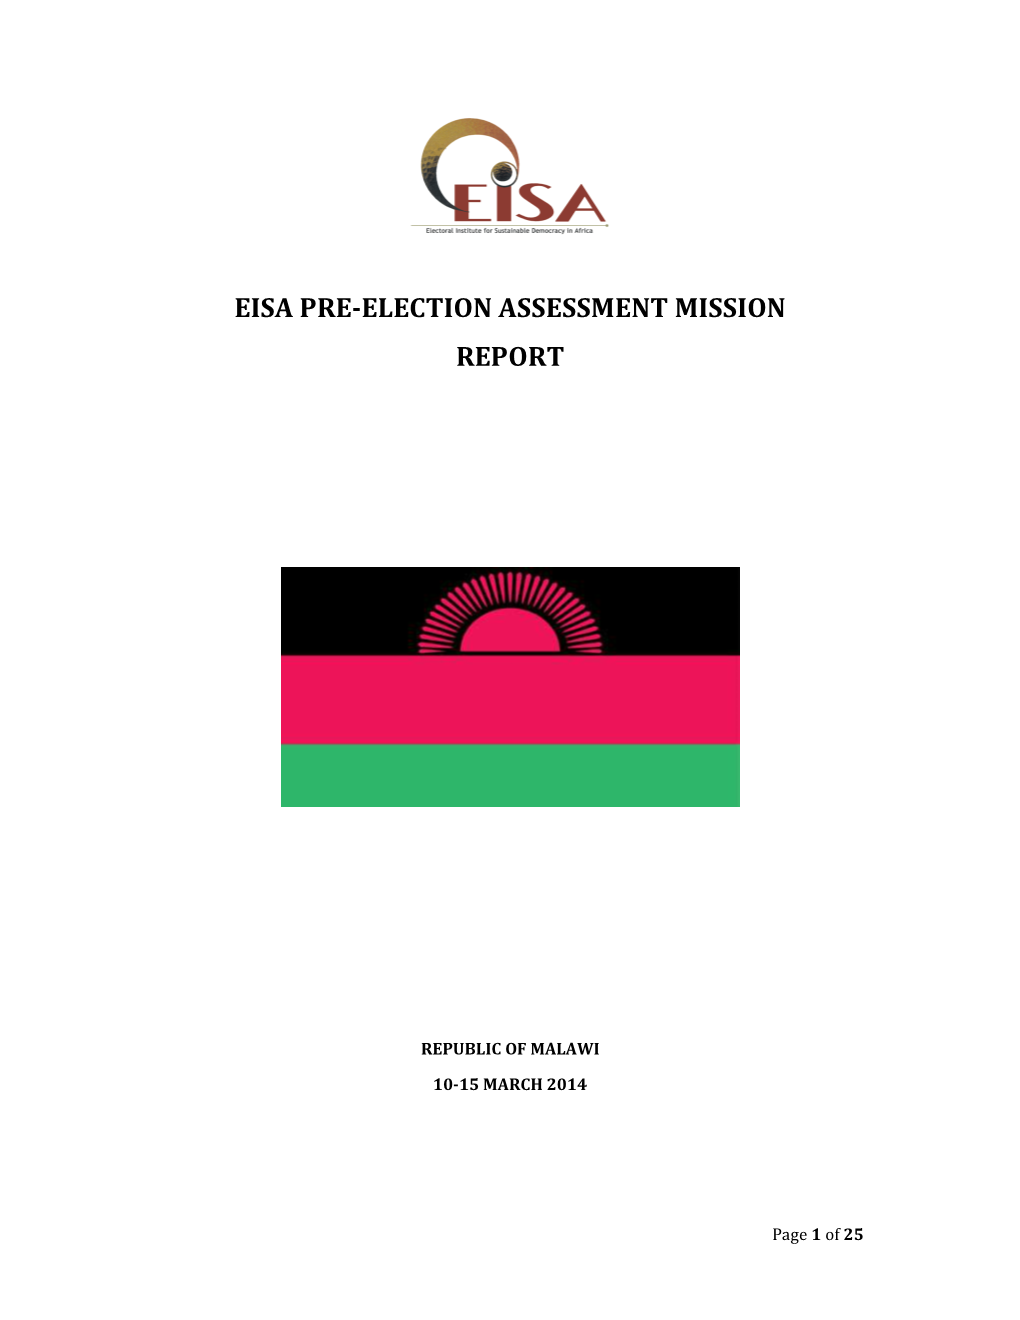 Eisa Pre-Election Assessment Mission Report